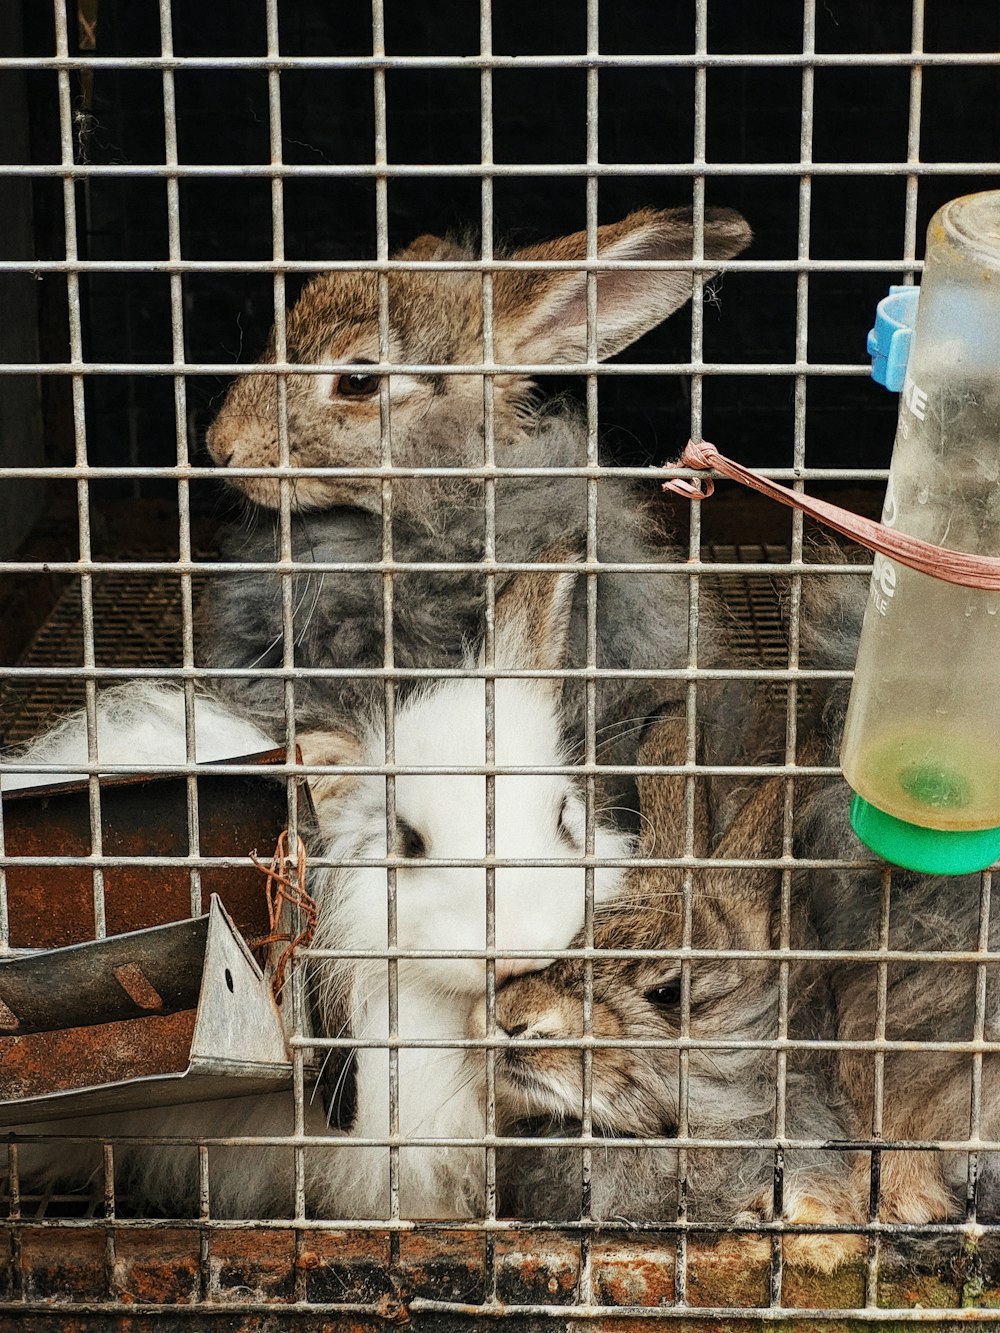 a rabbit in a cage with a bottle of water